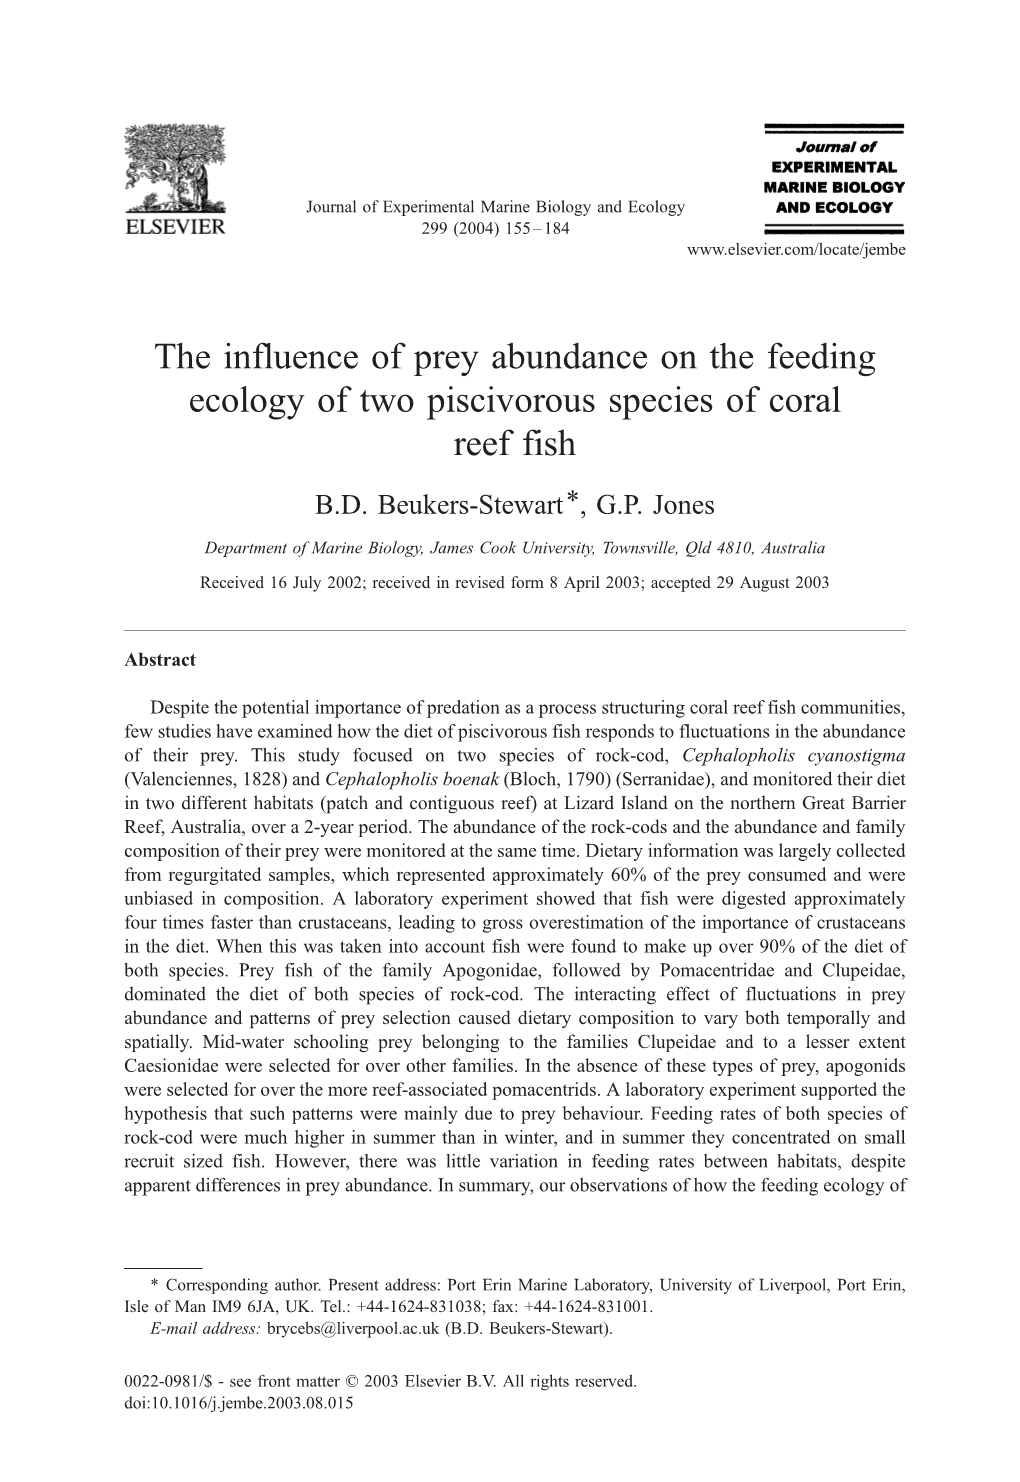 The Influence of Prey Abundance on the Feeding Ecology of Two Piscivorous Species of Coral Reef Fish